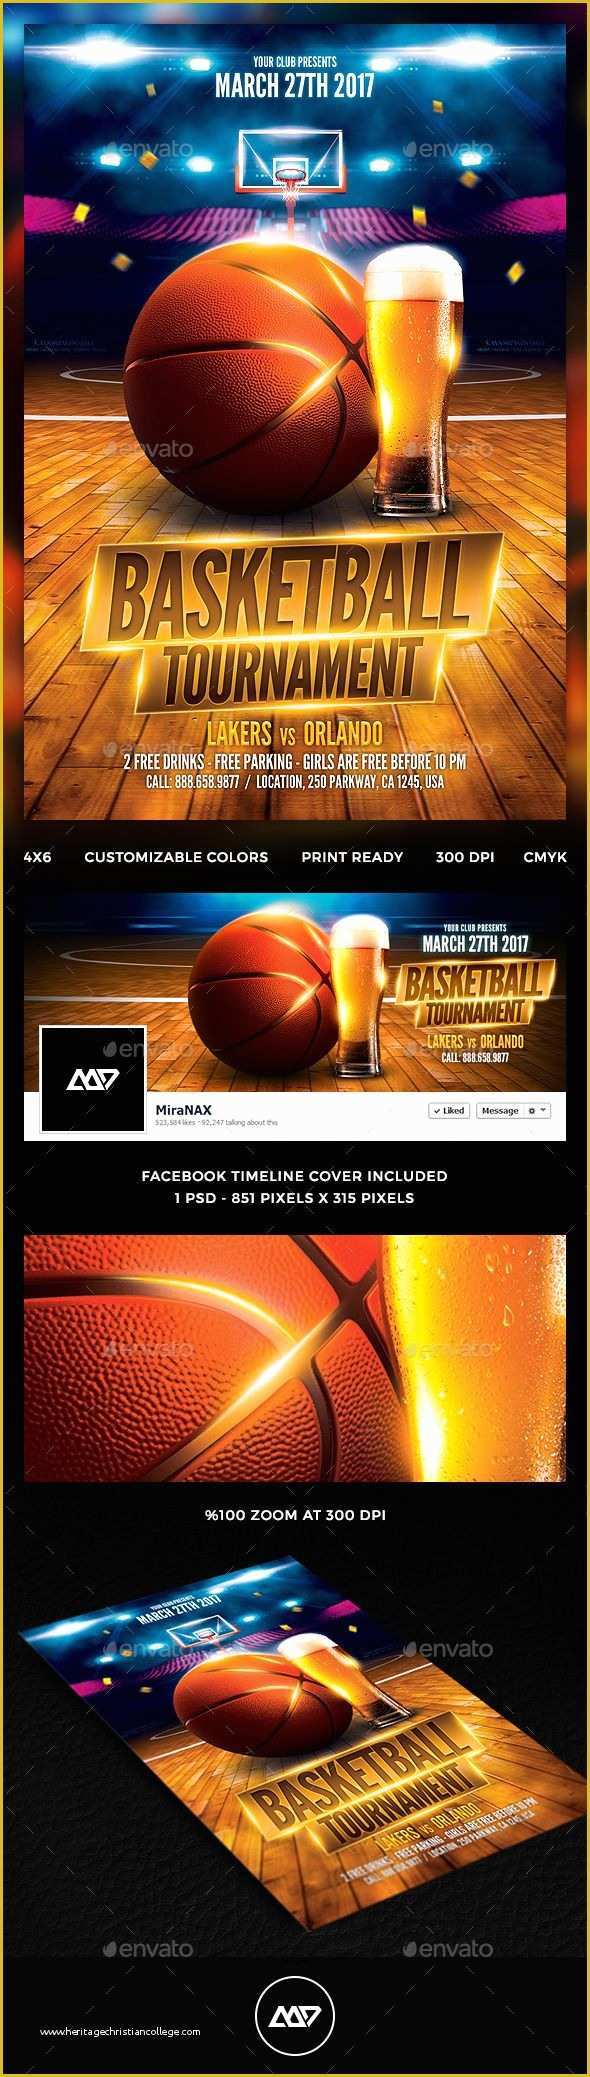 Free Basketball Photoshop Templates Of Pin by Randy Peterson On Graphix